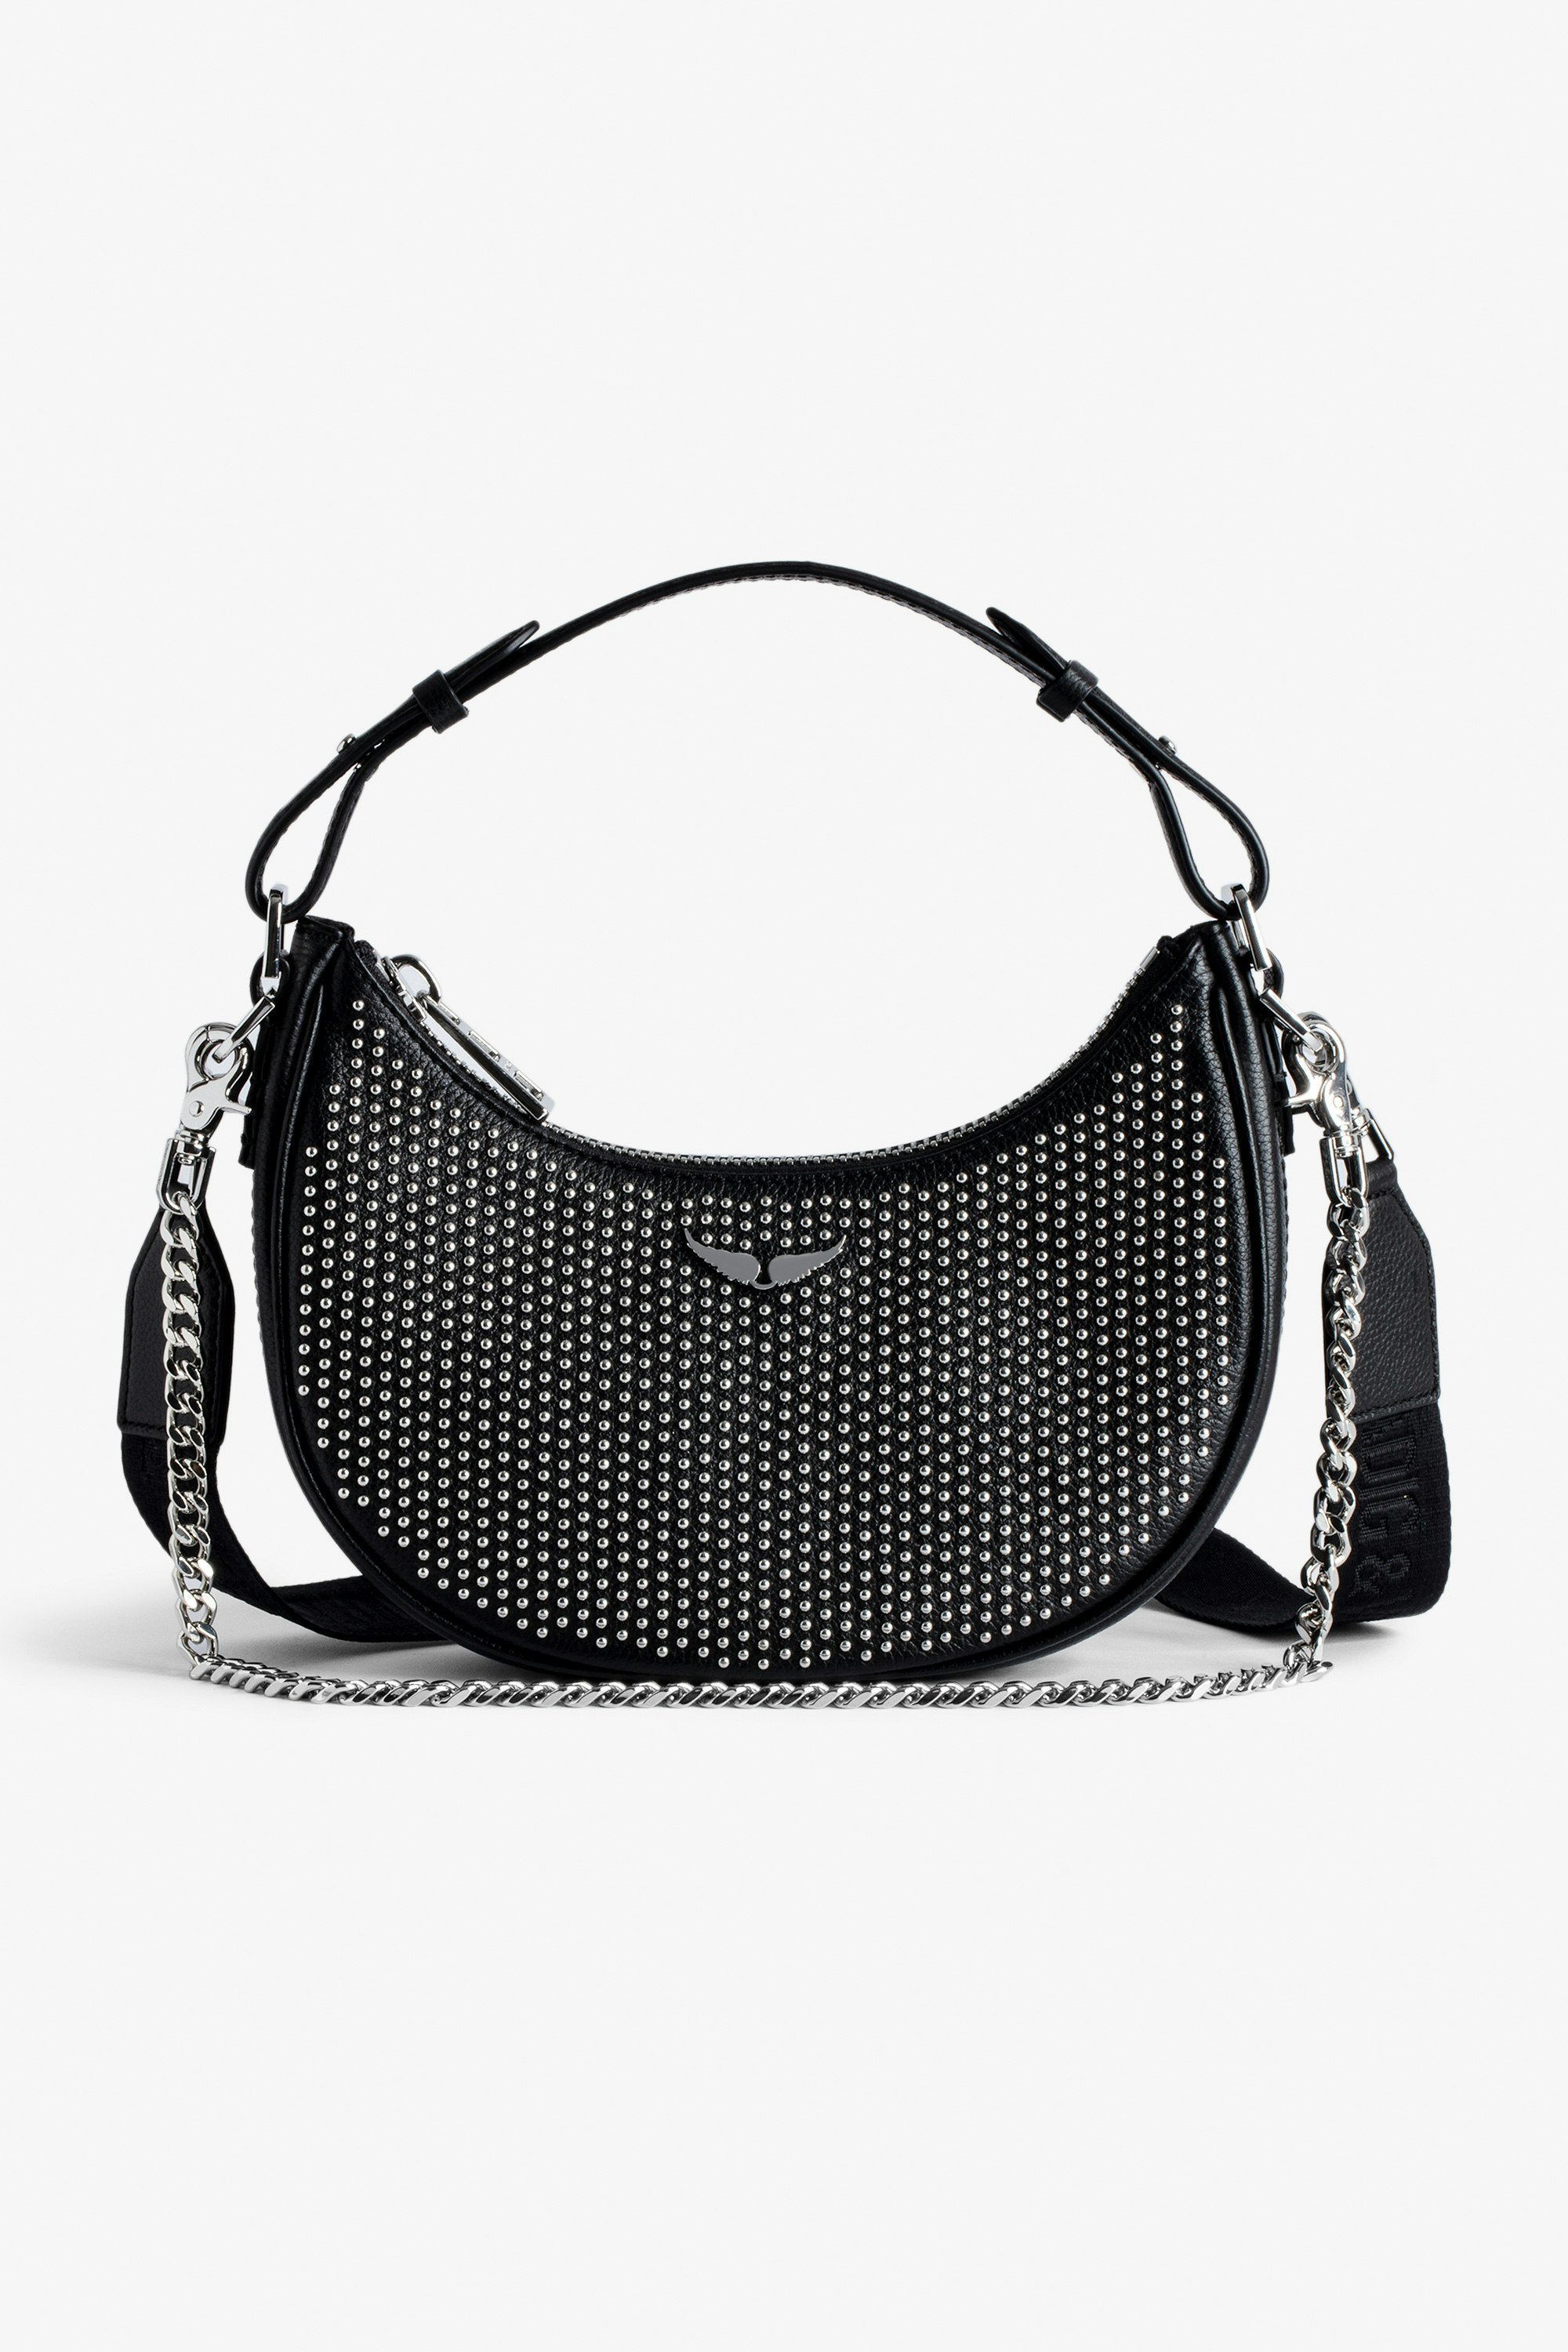 Moonrock Dotted Swiss Bag - Women’s half-moon bag in black grained leather with a short handle, shoulder strap, chain and signature wings.